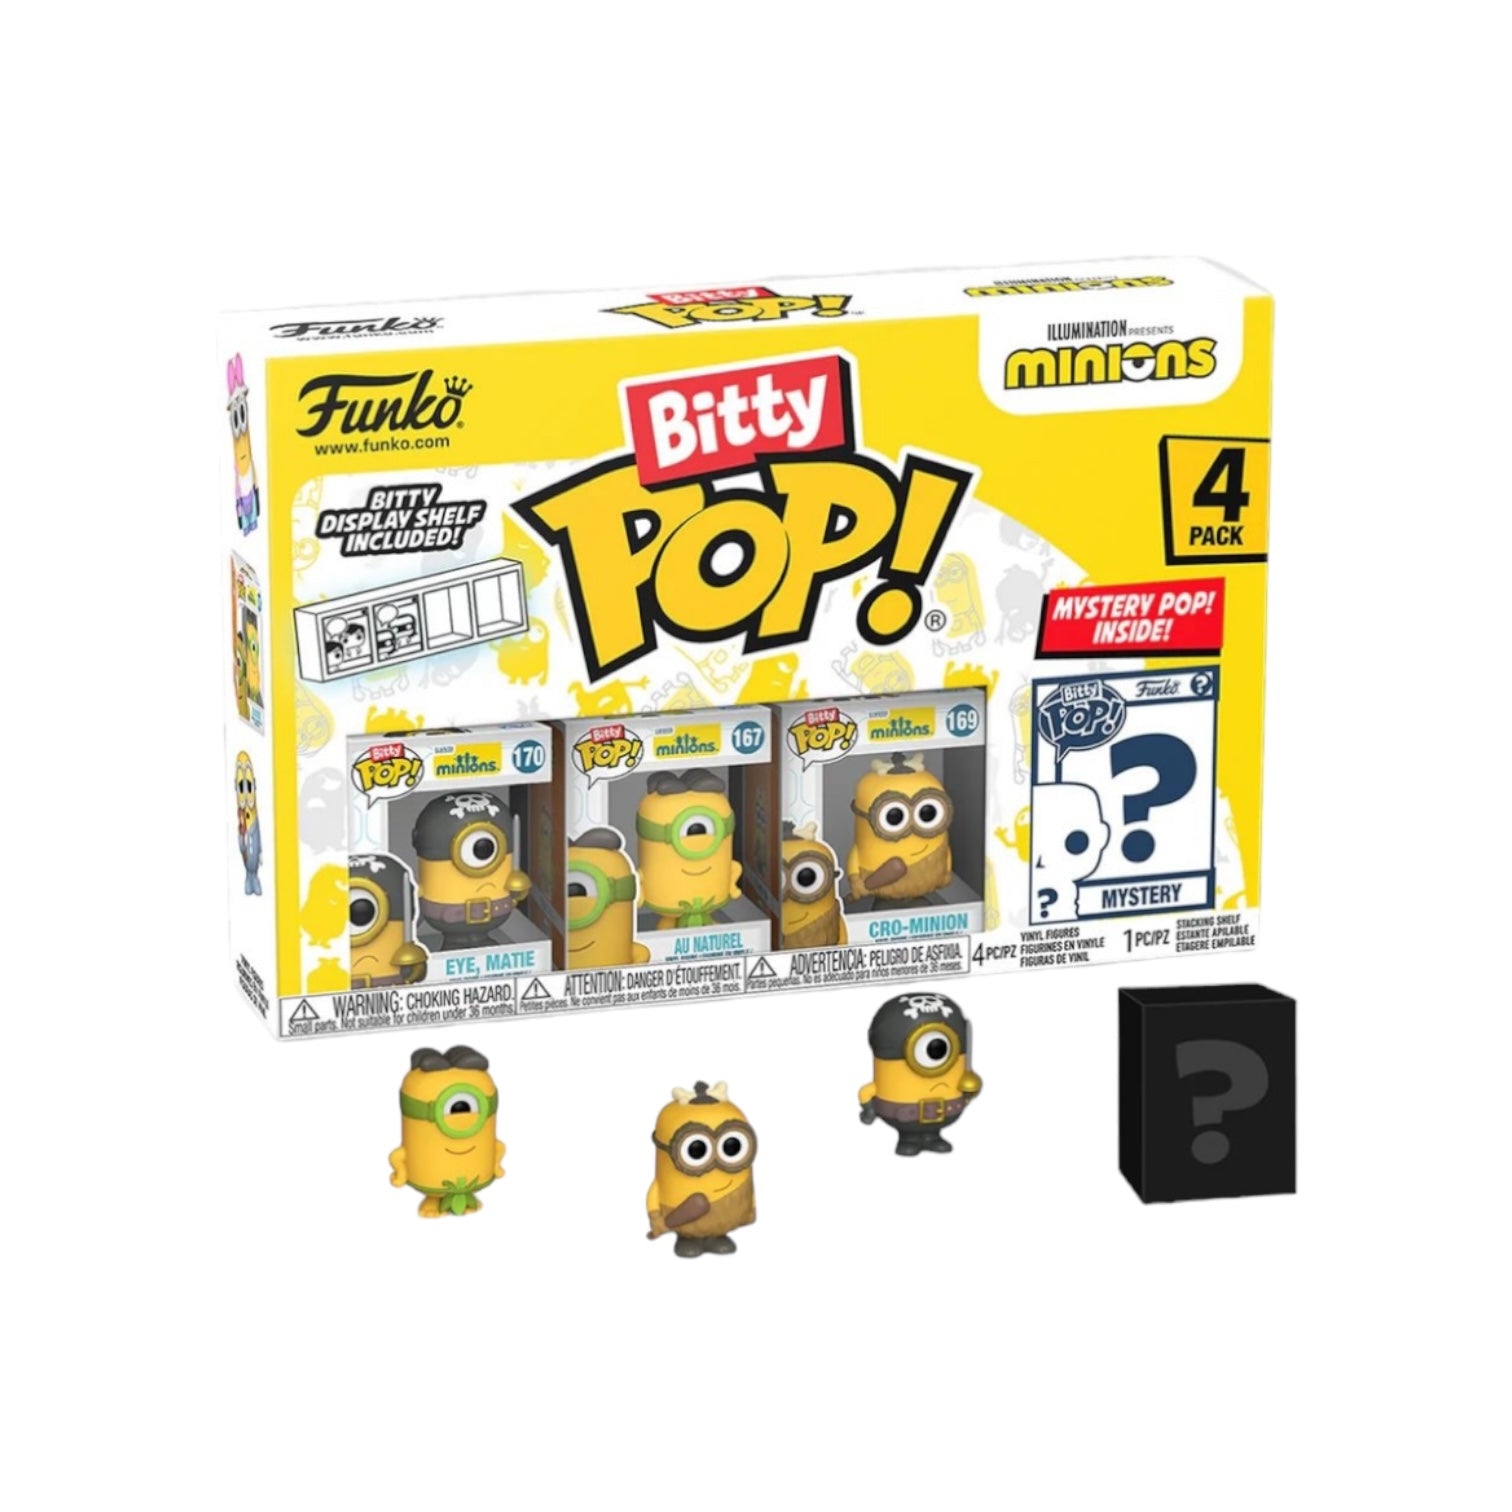 Eye Matie 4 Pack Bitty Funko POP! - Minions - Chance Of Chase - PREORDER